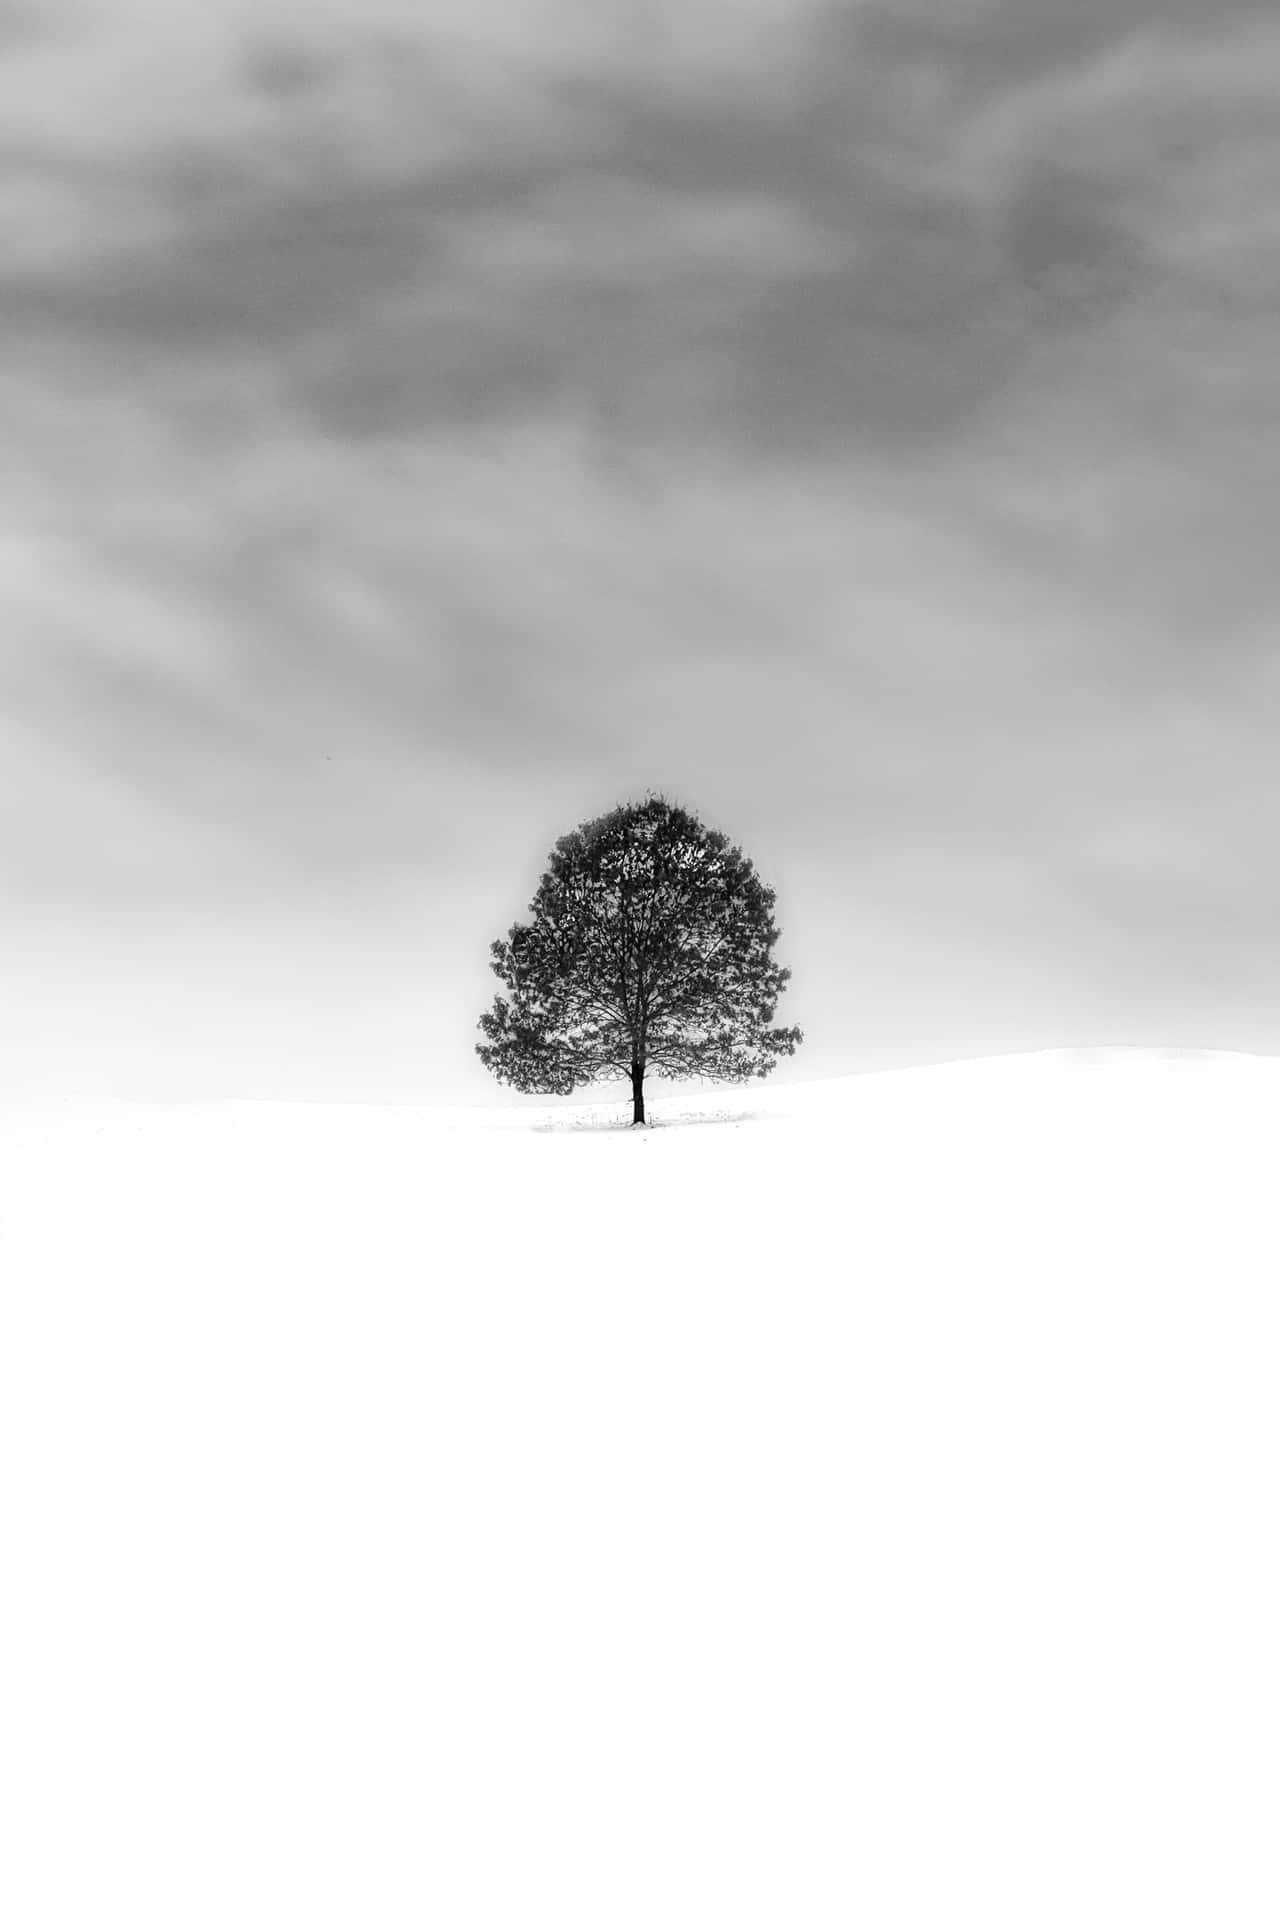 Solitary Tree In Monochrome Landscape Background